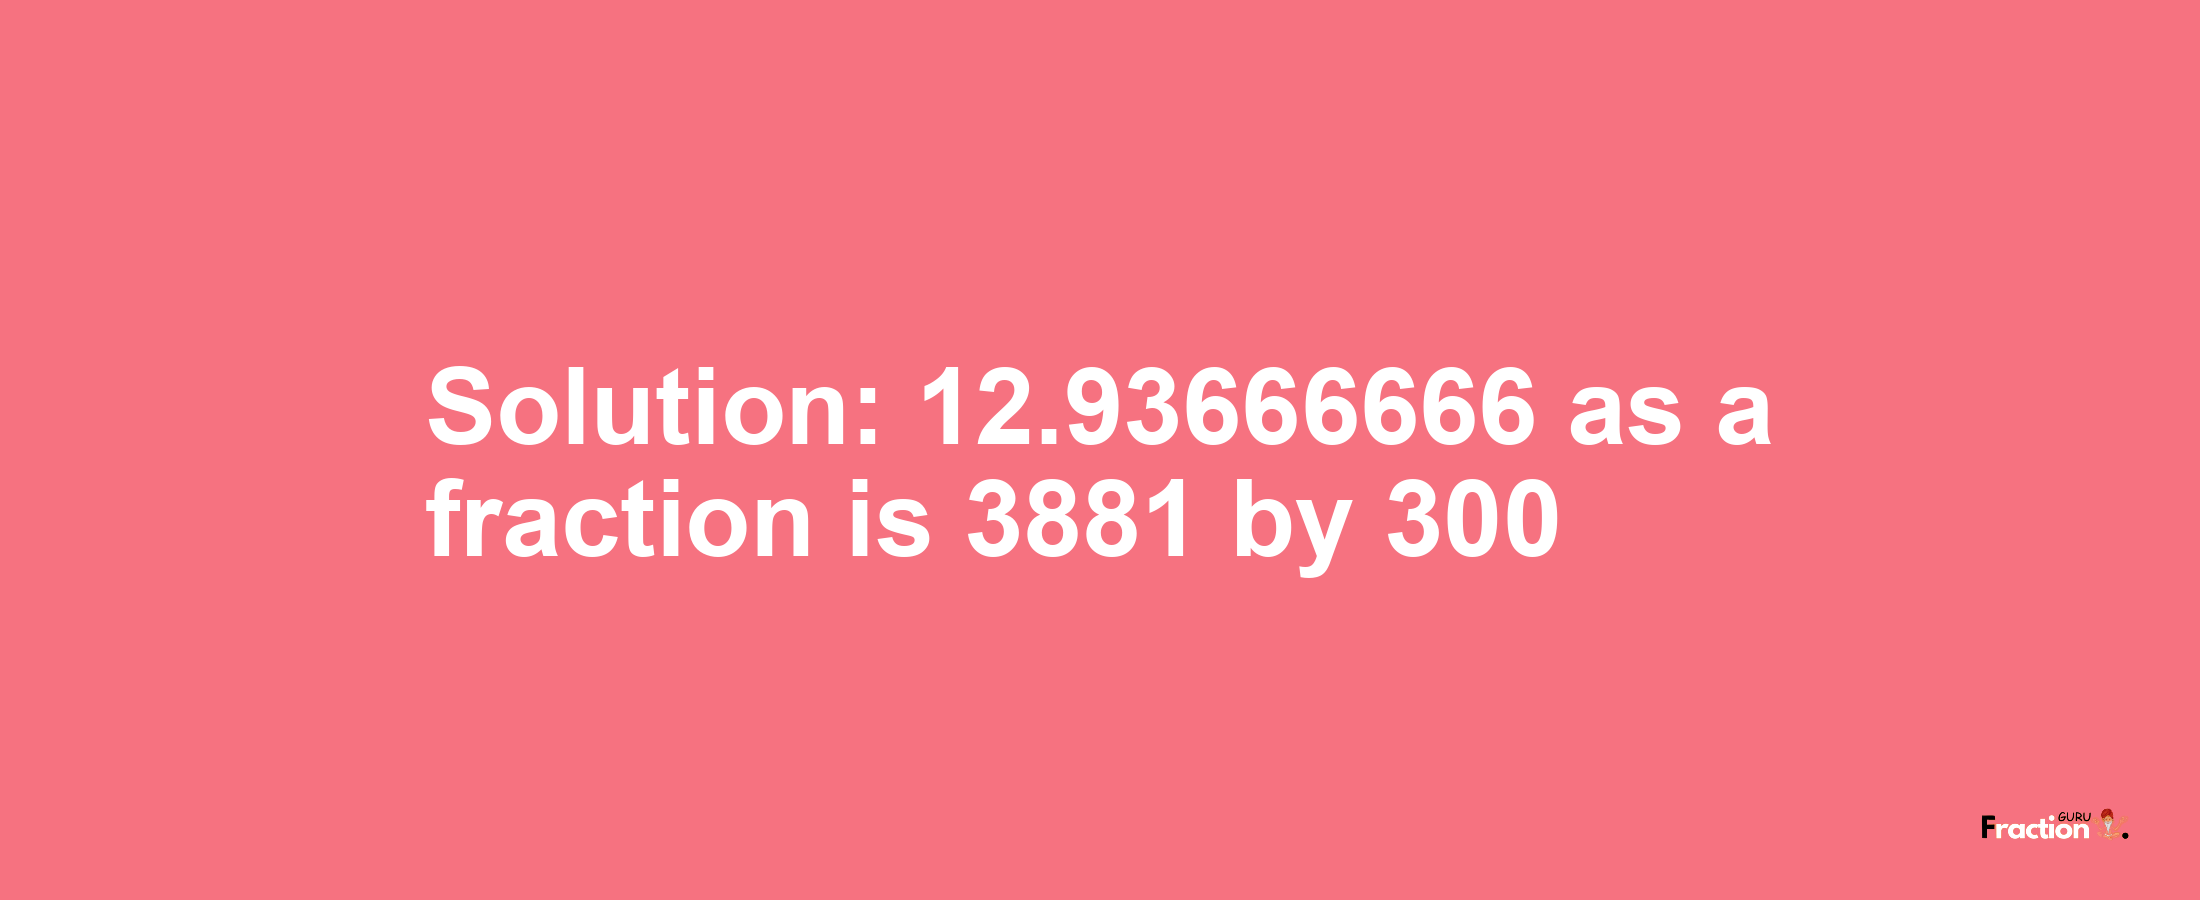 Solution:12.93666666 as a fraction is 3881/300